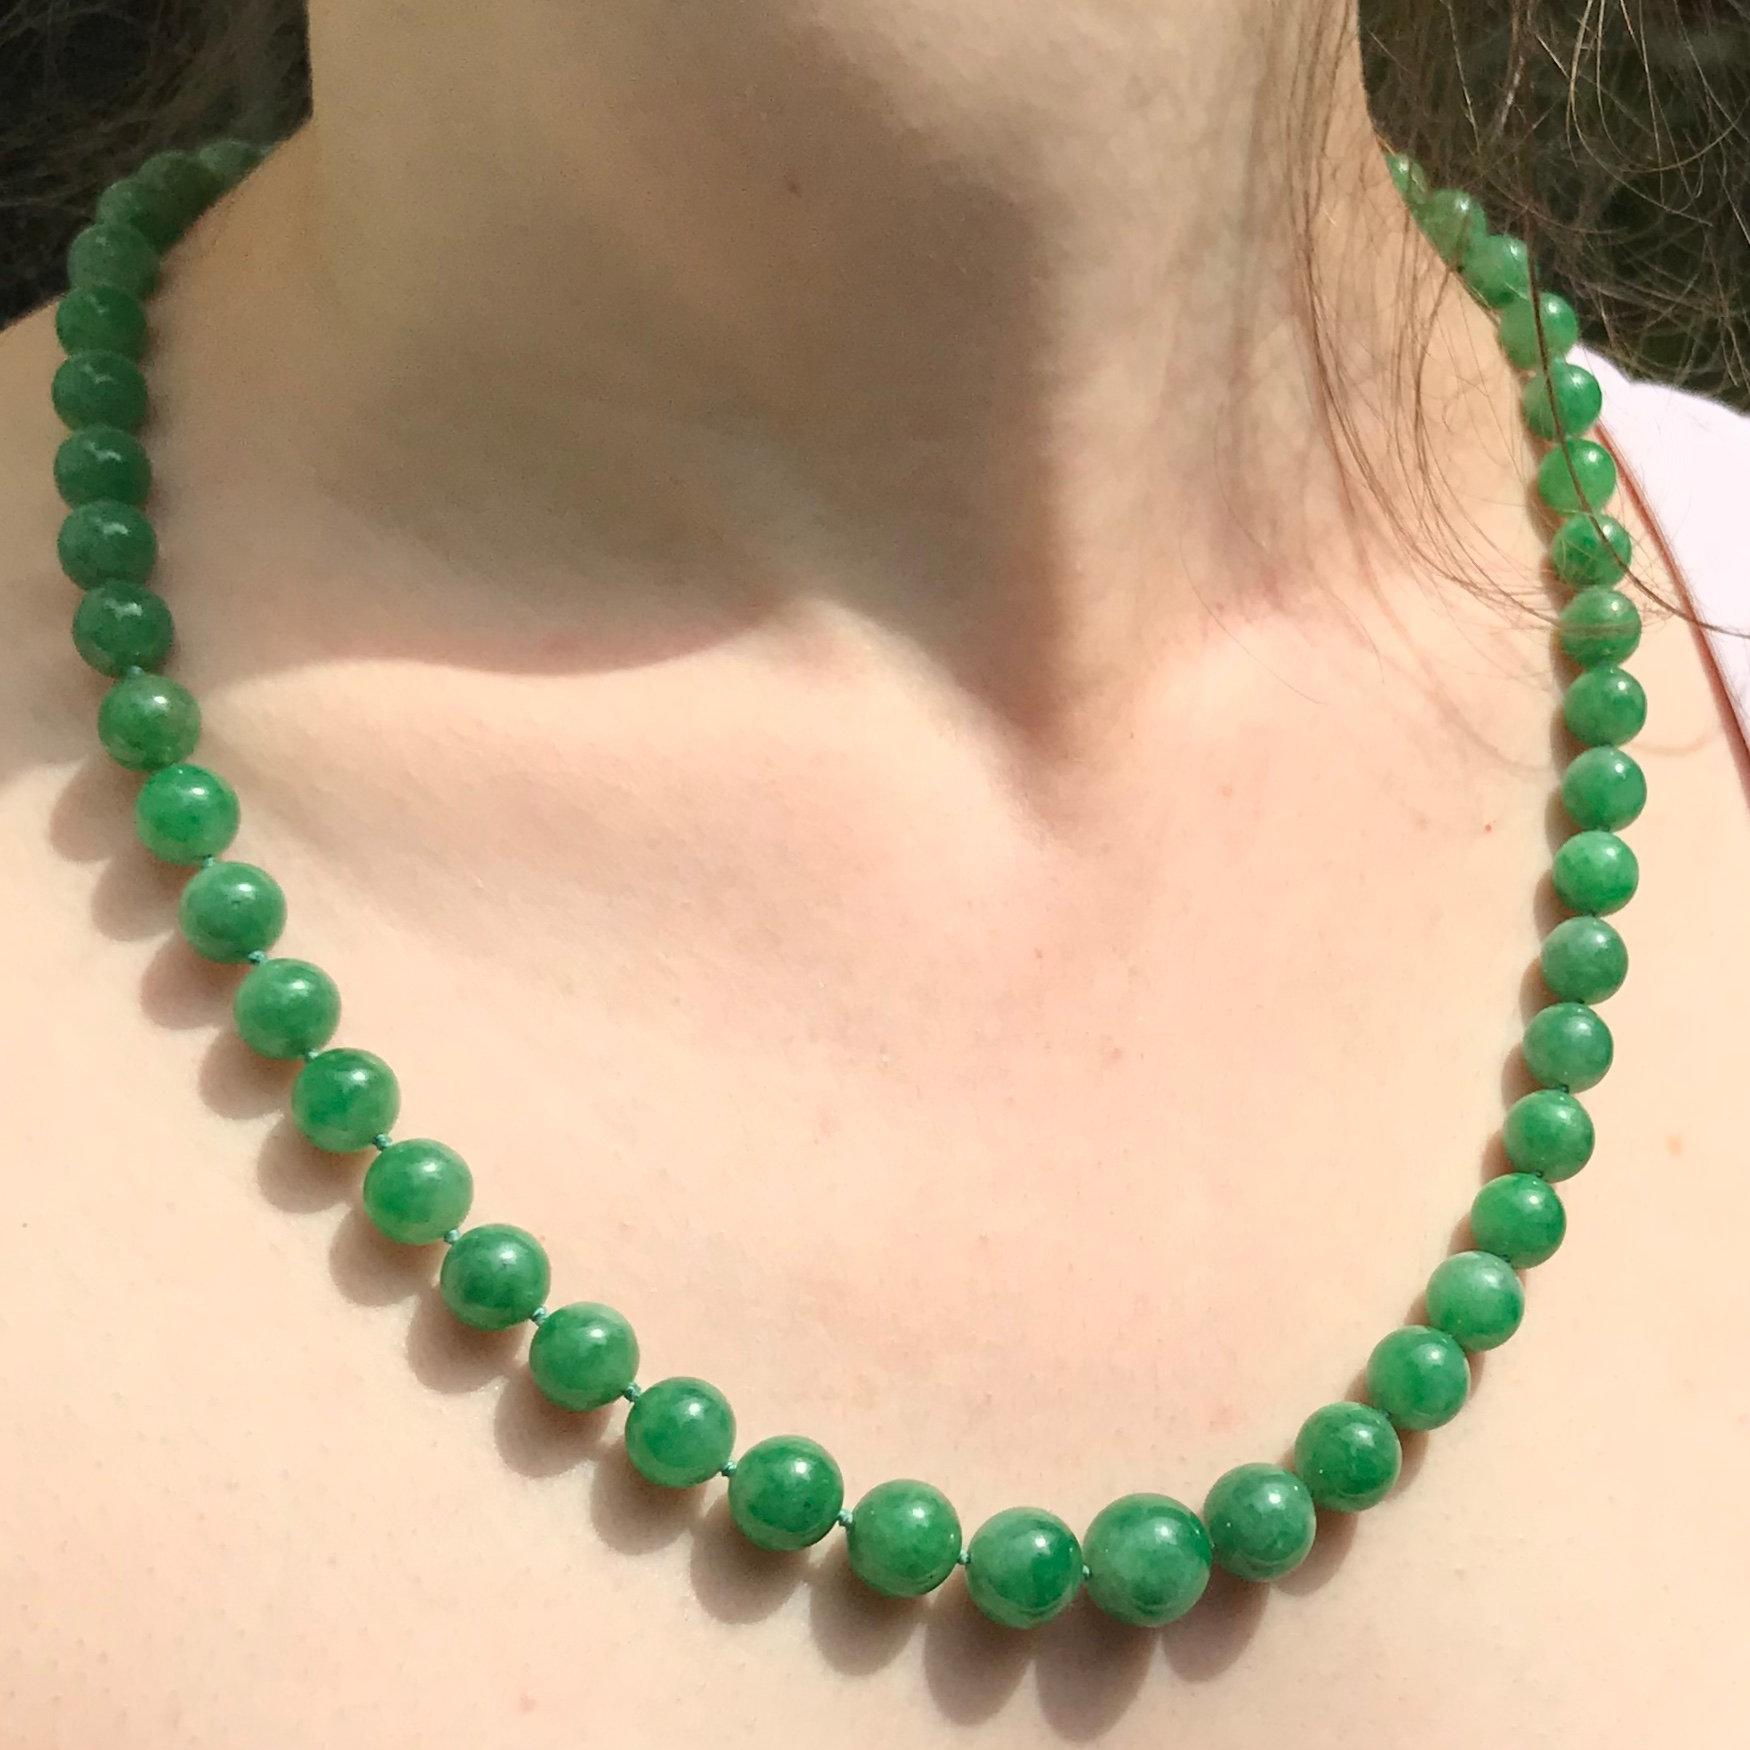 Certified Top Quality Natural A-Jadeite Necklace of 53 Beads '67.51 Grams' In Excellent Condition For Sale In Antwerp, BE